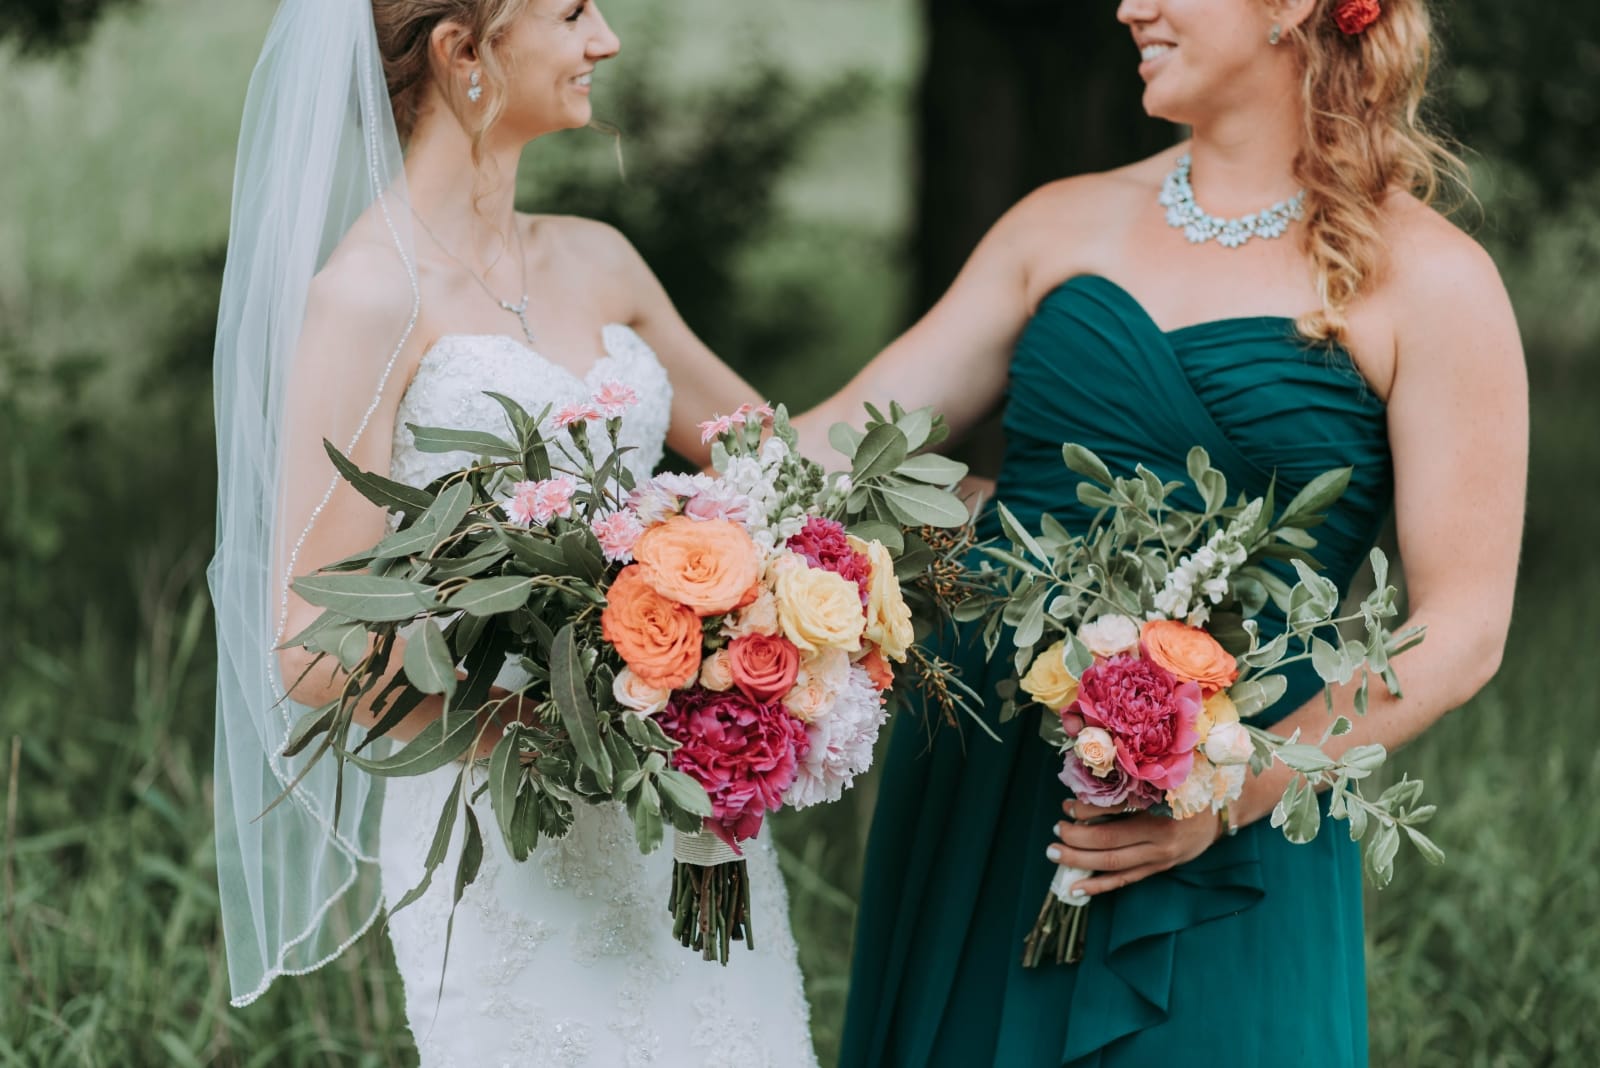 bride and bridesmaid standing outdoor holding bouquet of flowers